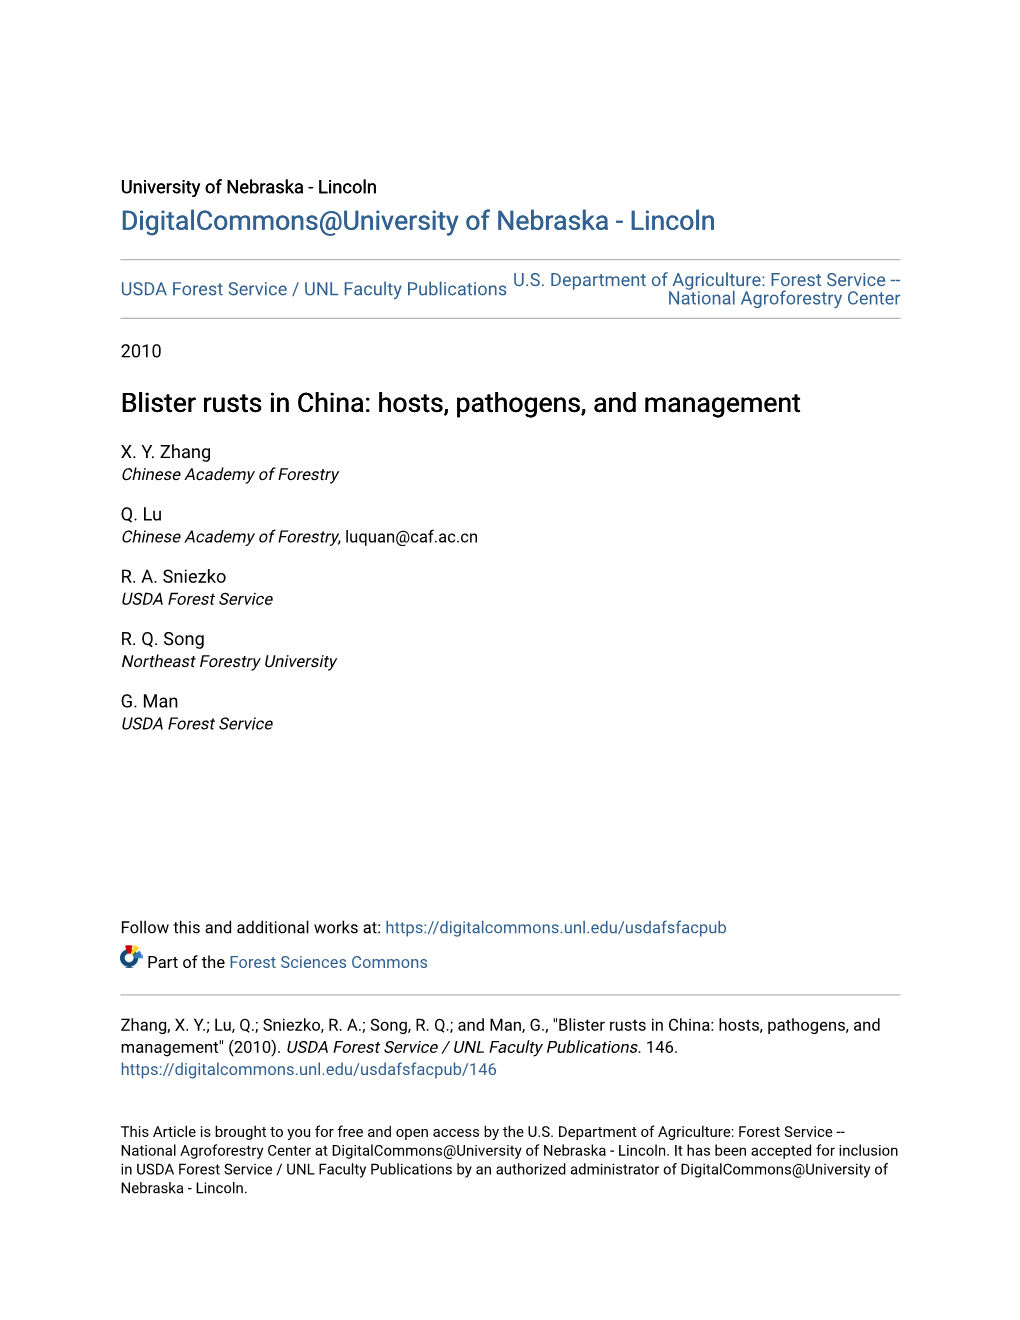 Blister Rusts in China: Hosts, Pathogens, and Management